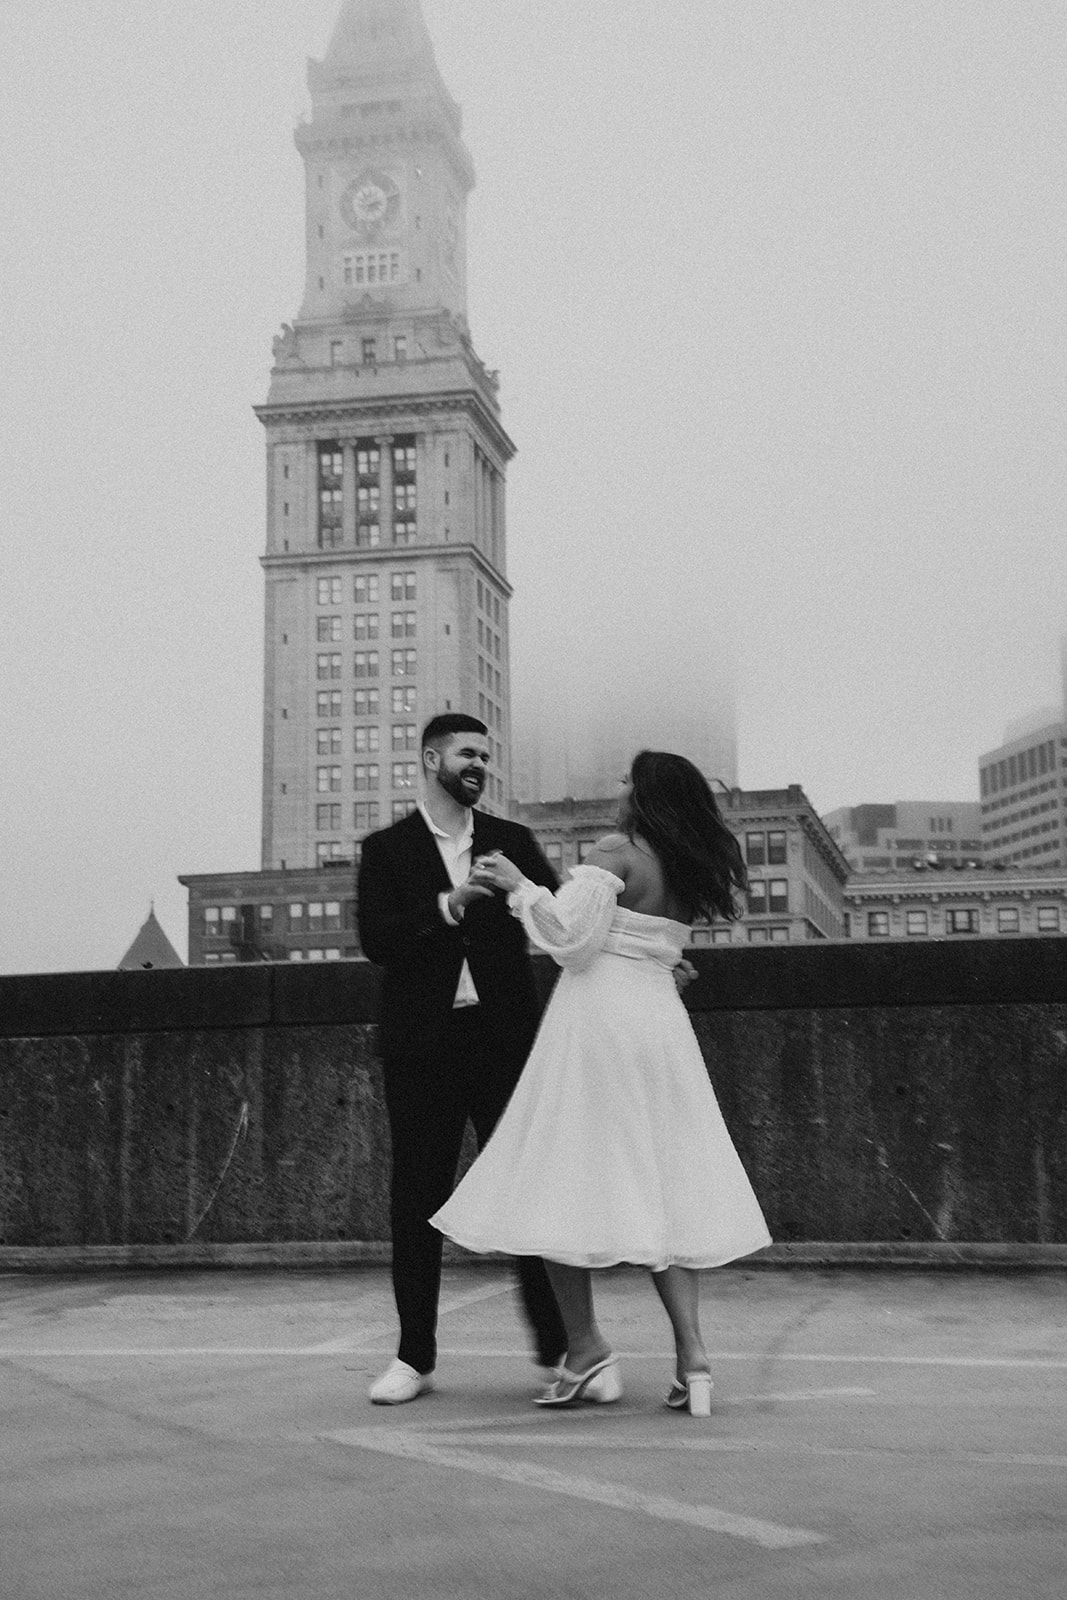 A couple stands on a rooftop parking garage in formal attire;Buildings and a foggy sky are visible in the background